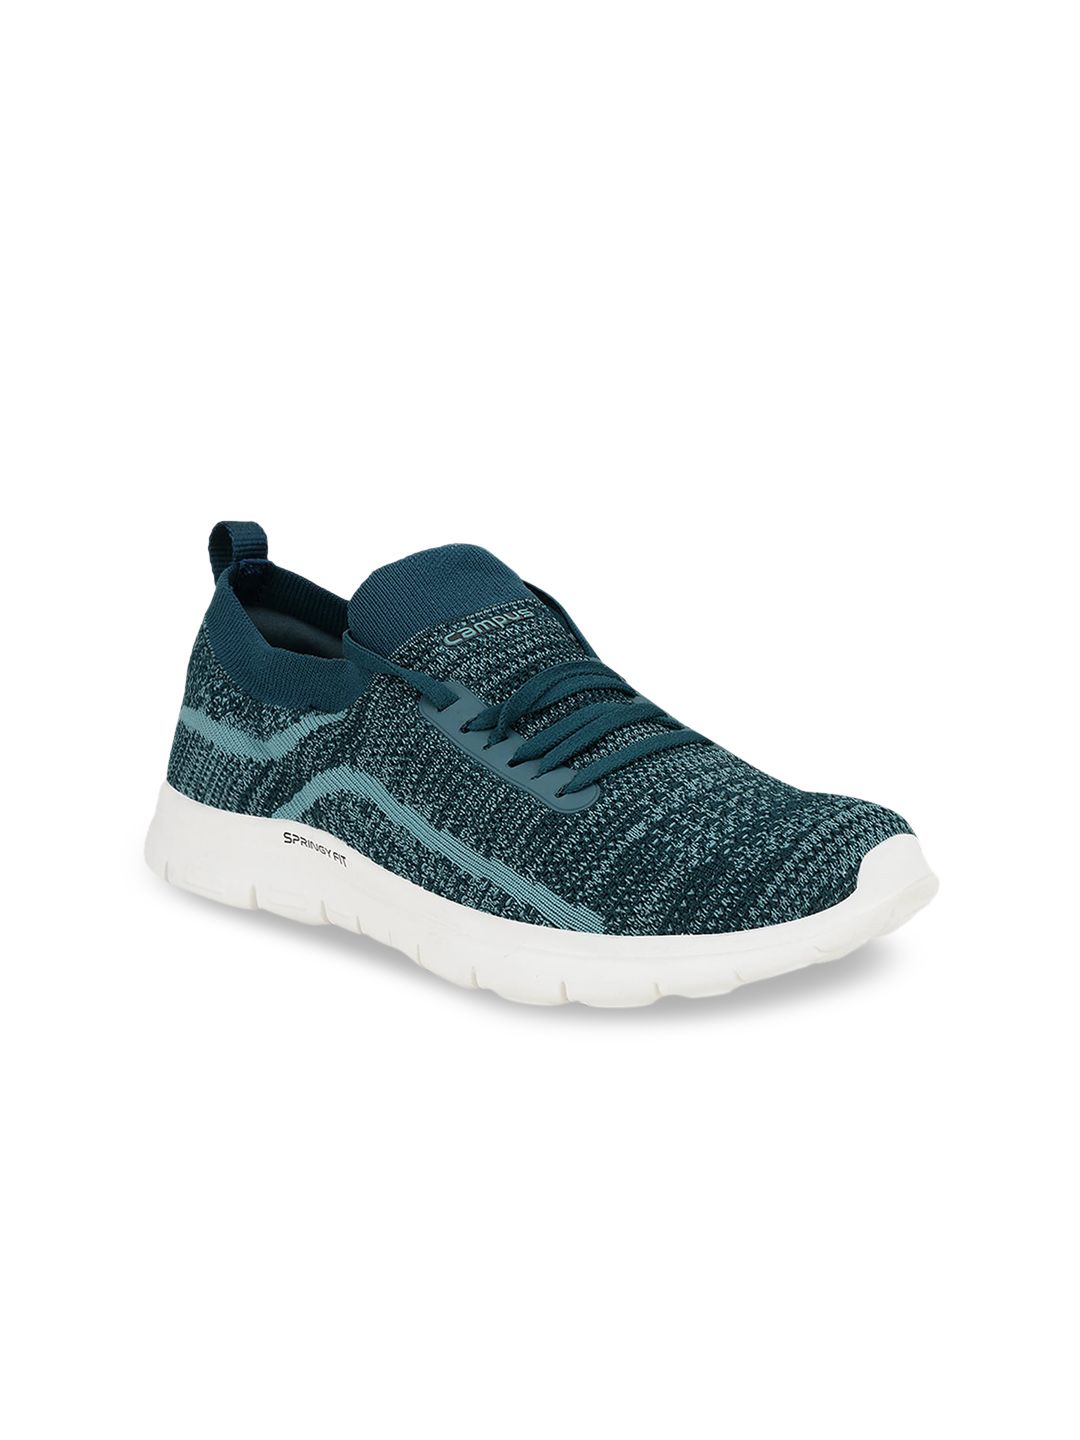 Campus Women Teal Mesh Mid-Top Running Shoes Price in India